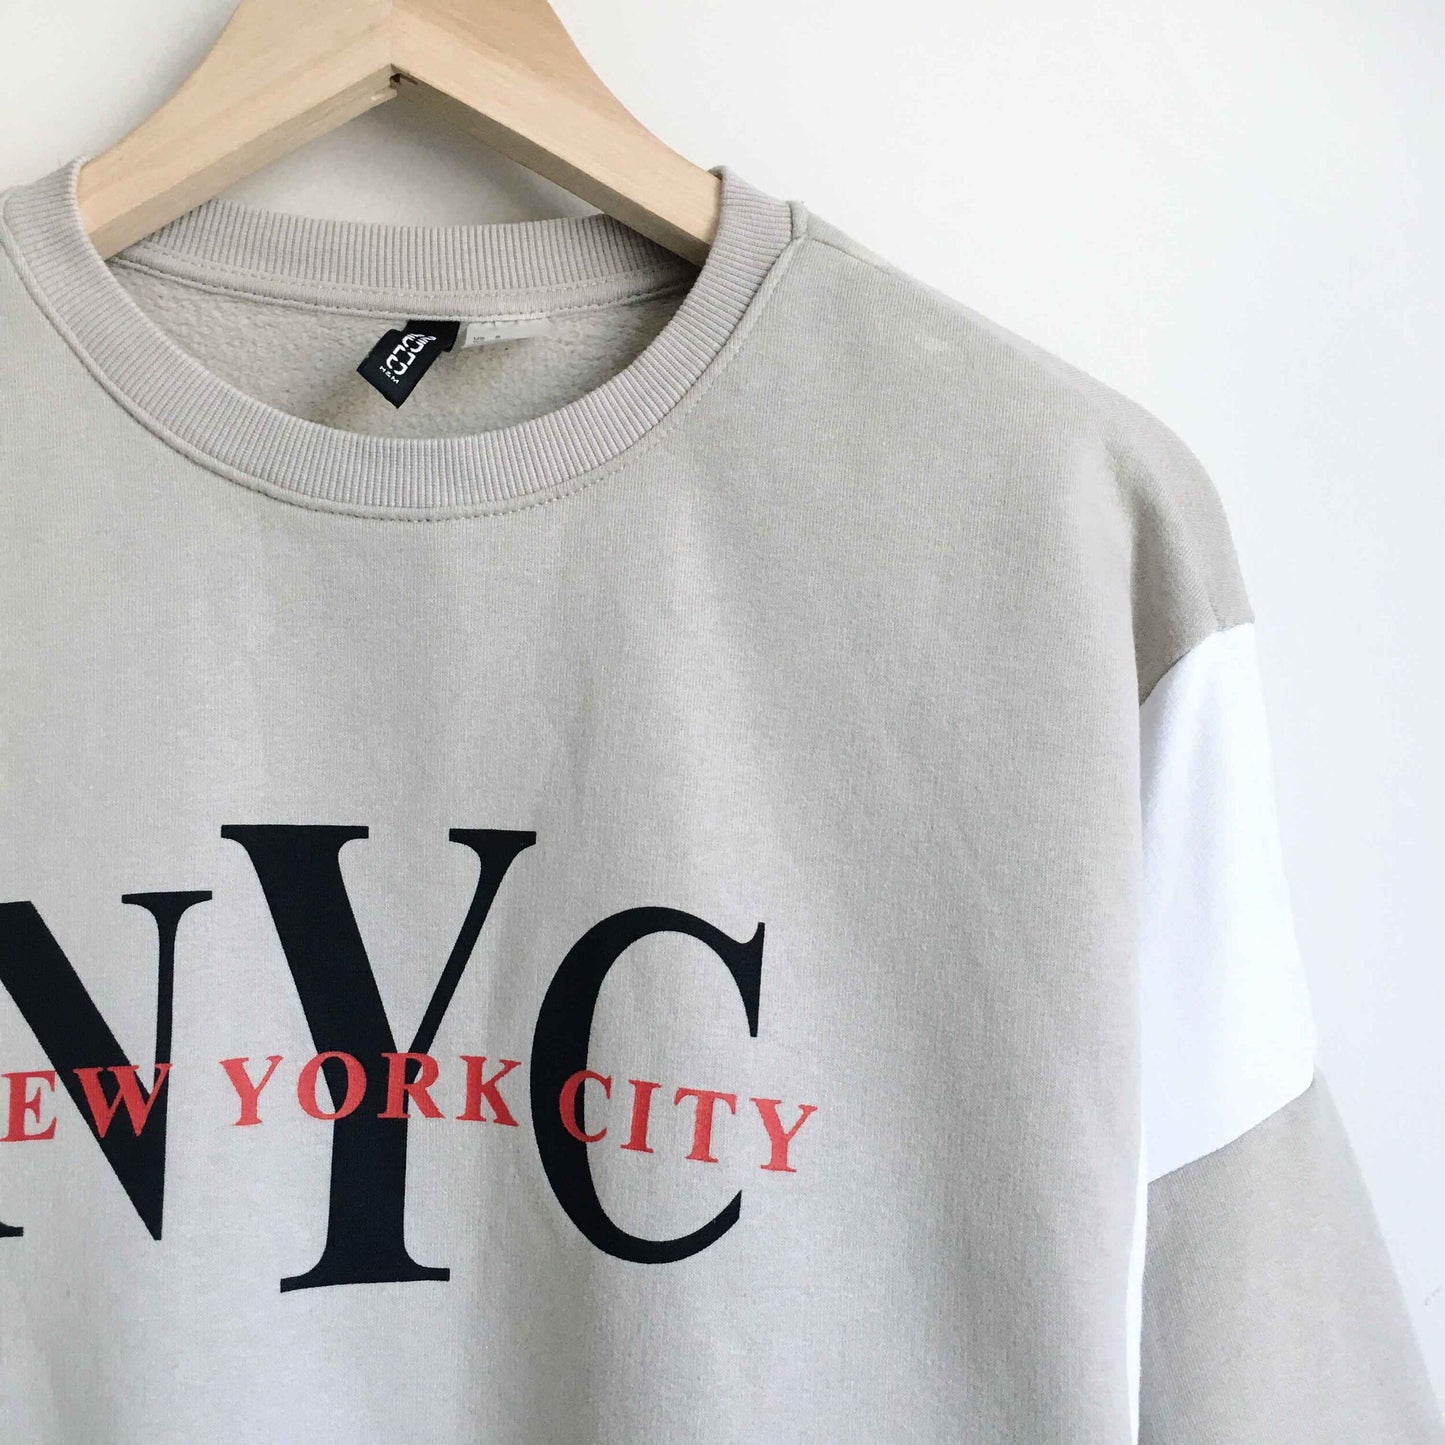 h&m dividend NYC sweatshirt - size small